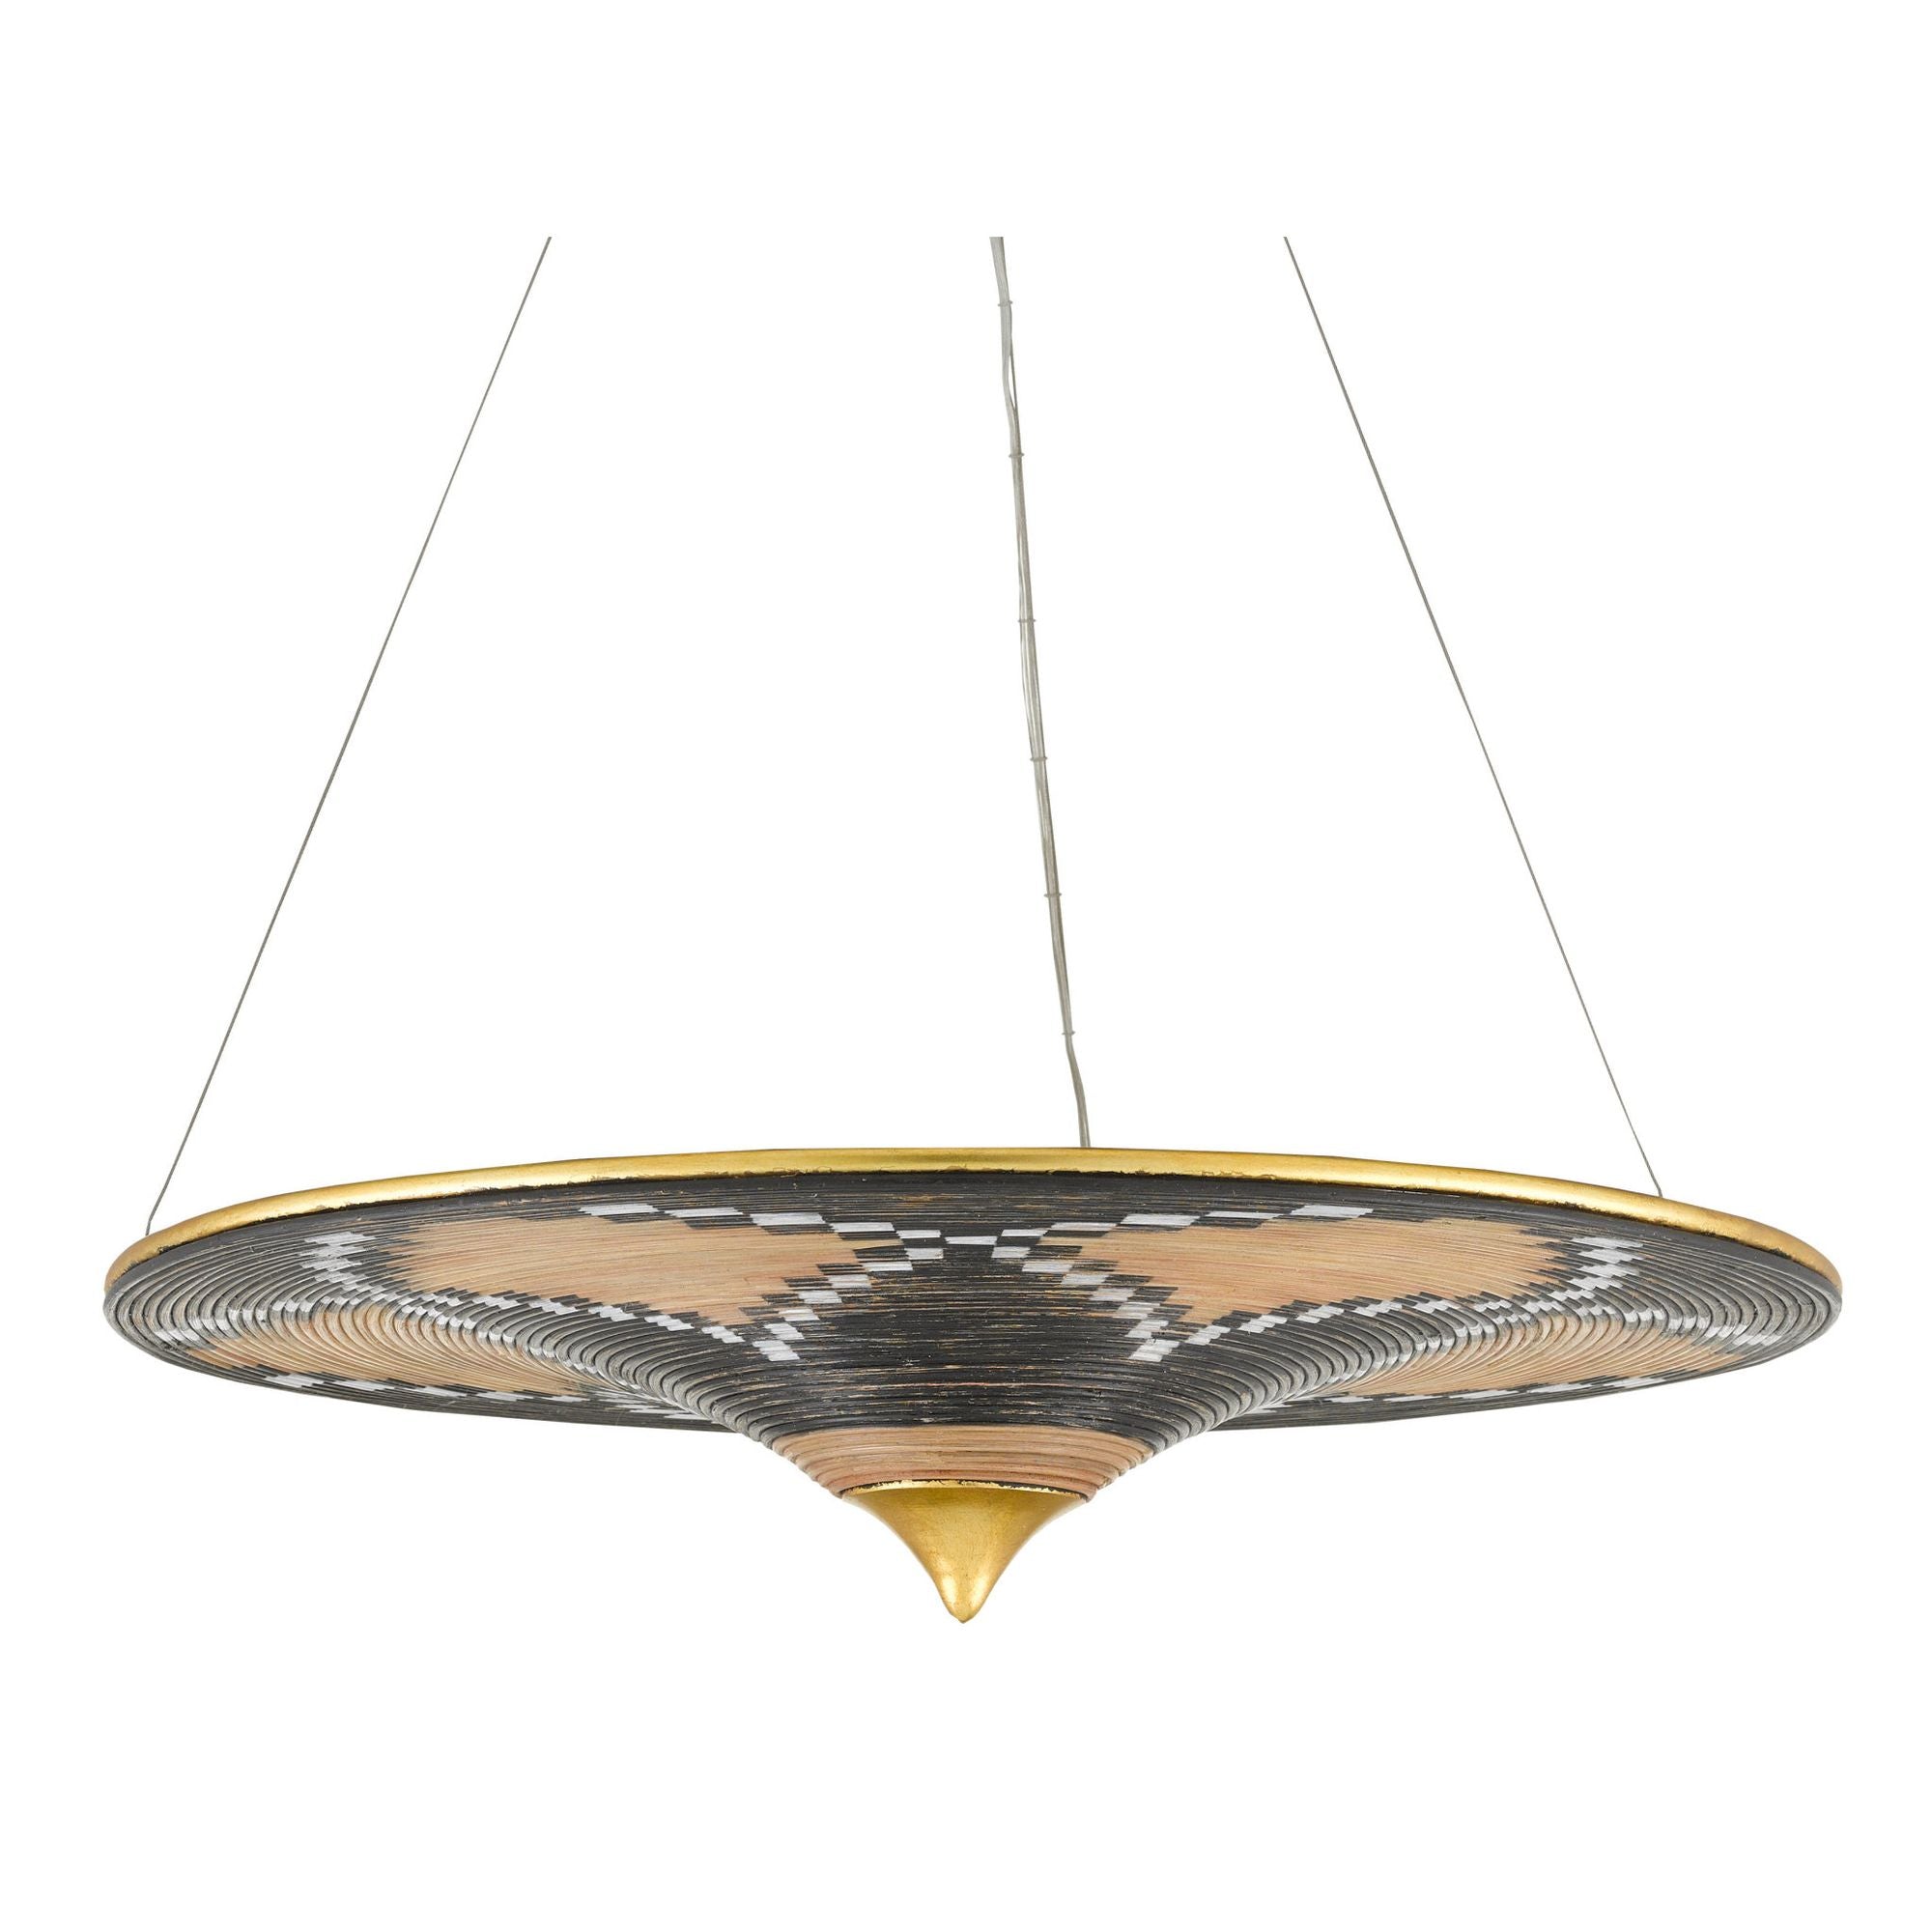 Canaan Chandelier - Contemporary Gold Leaf/Distressed Black/Distressed White